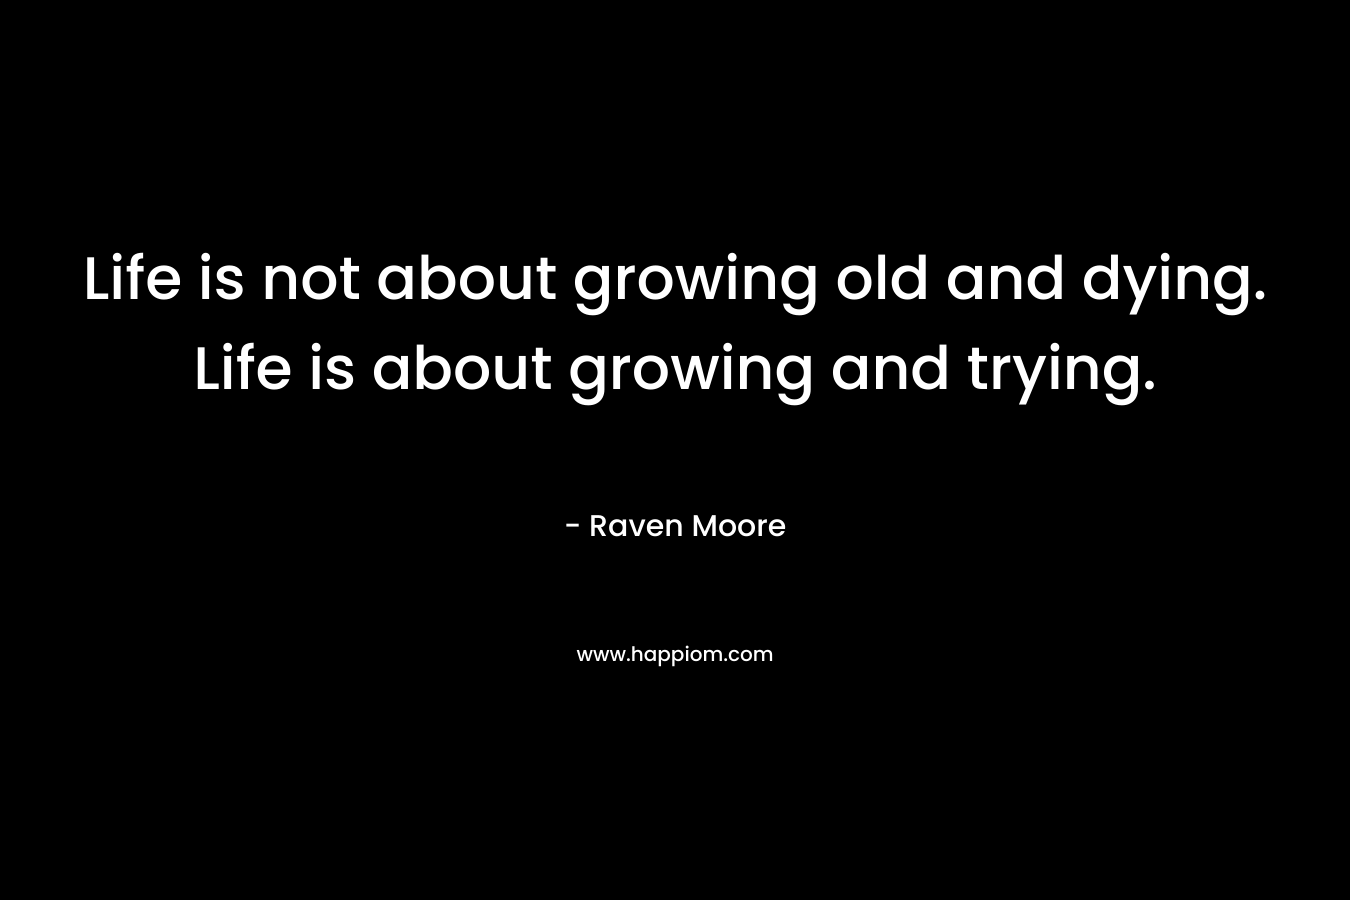 Life is not about growing old and dying. Life is about growing and trying.